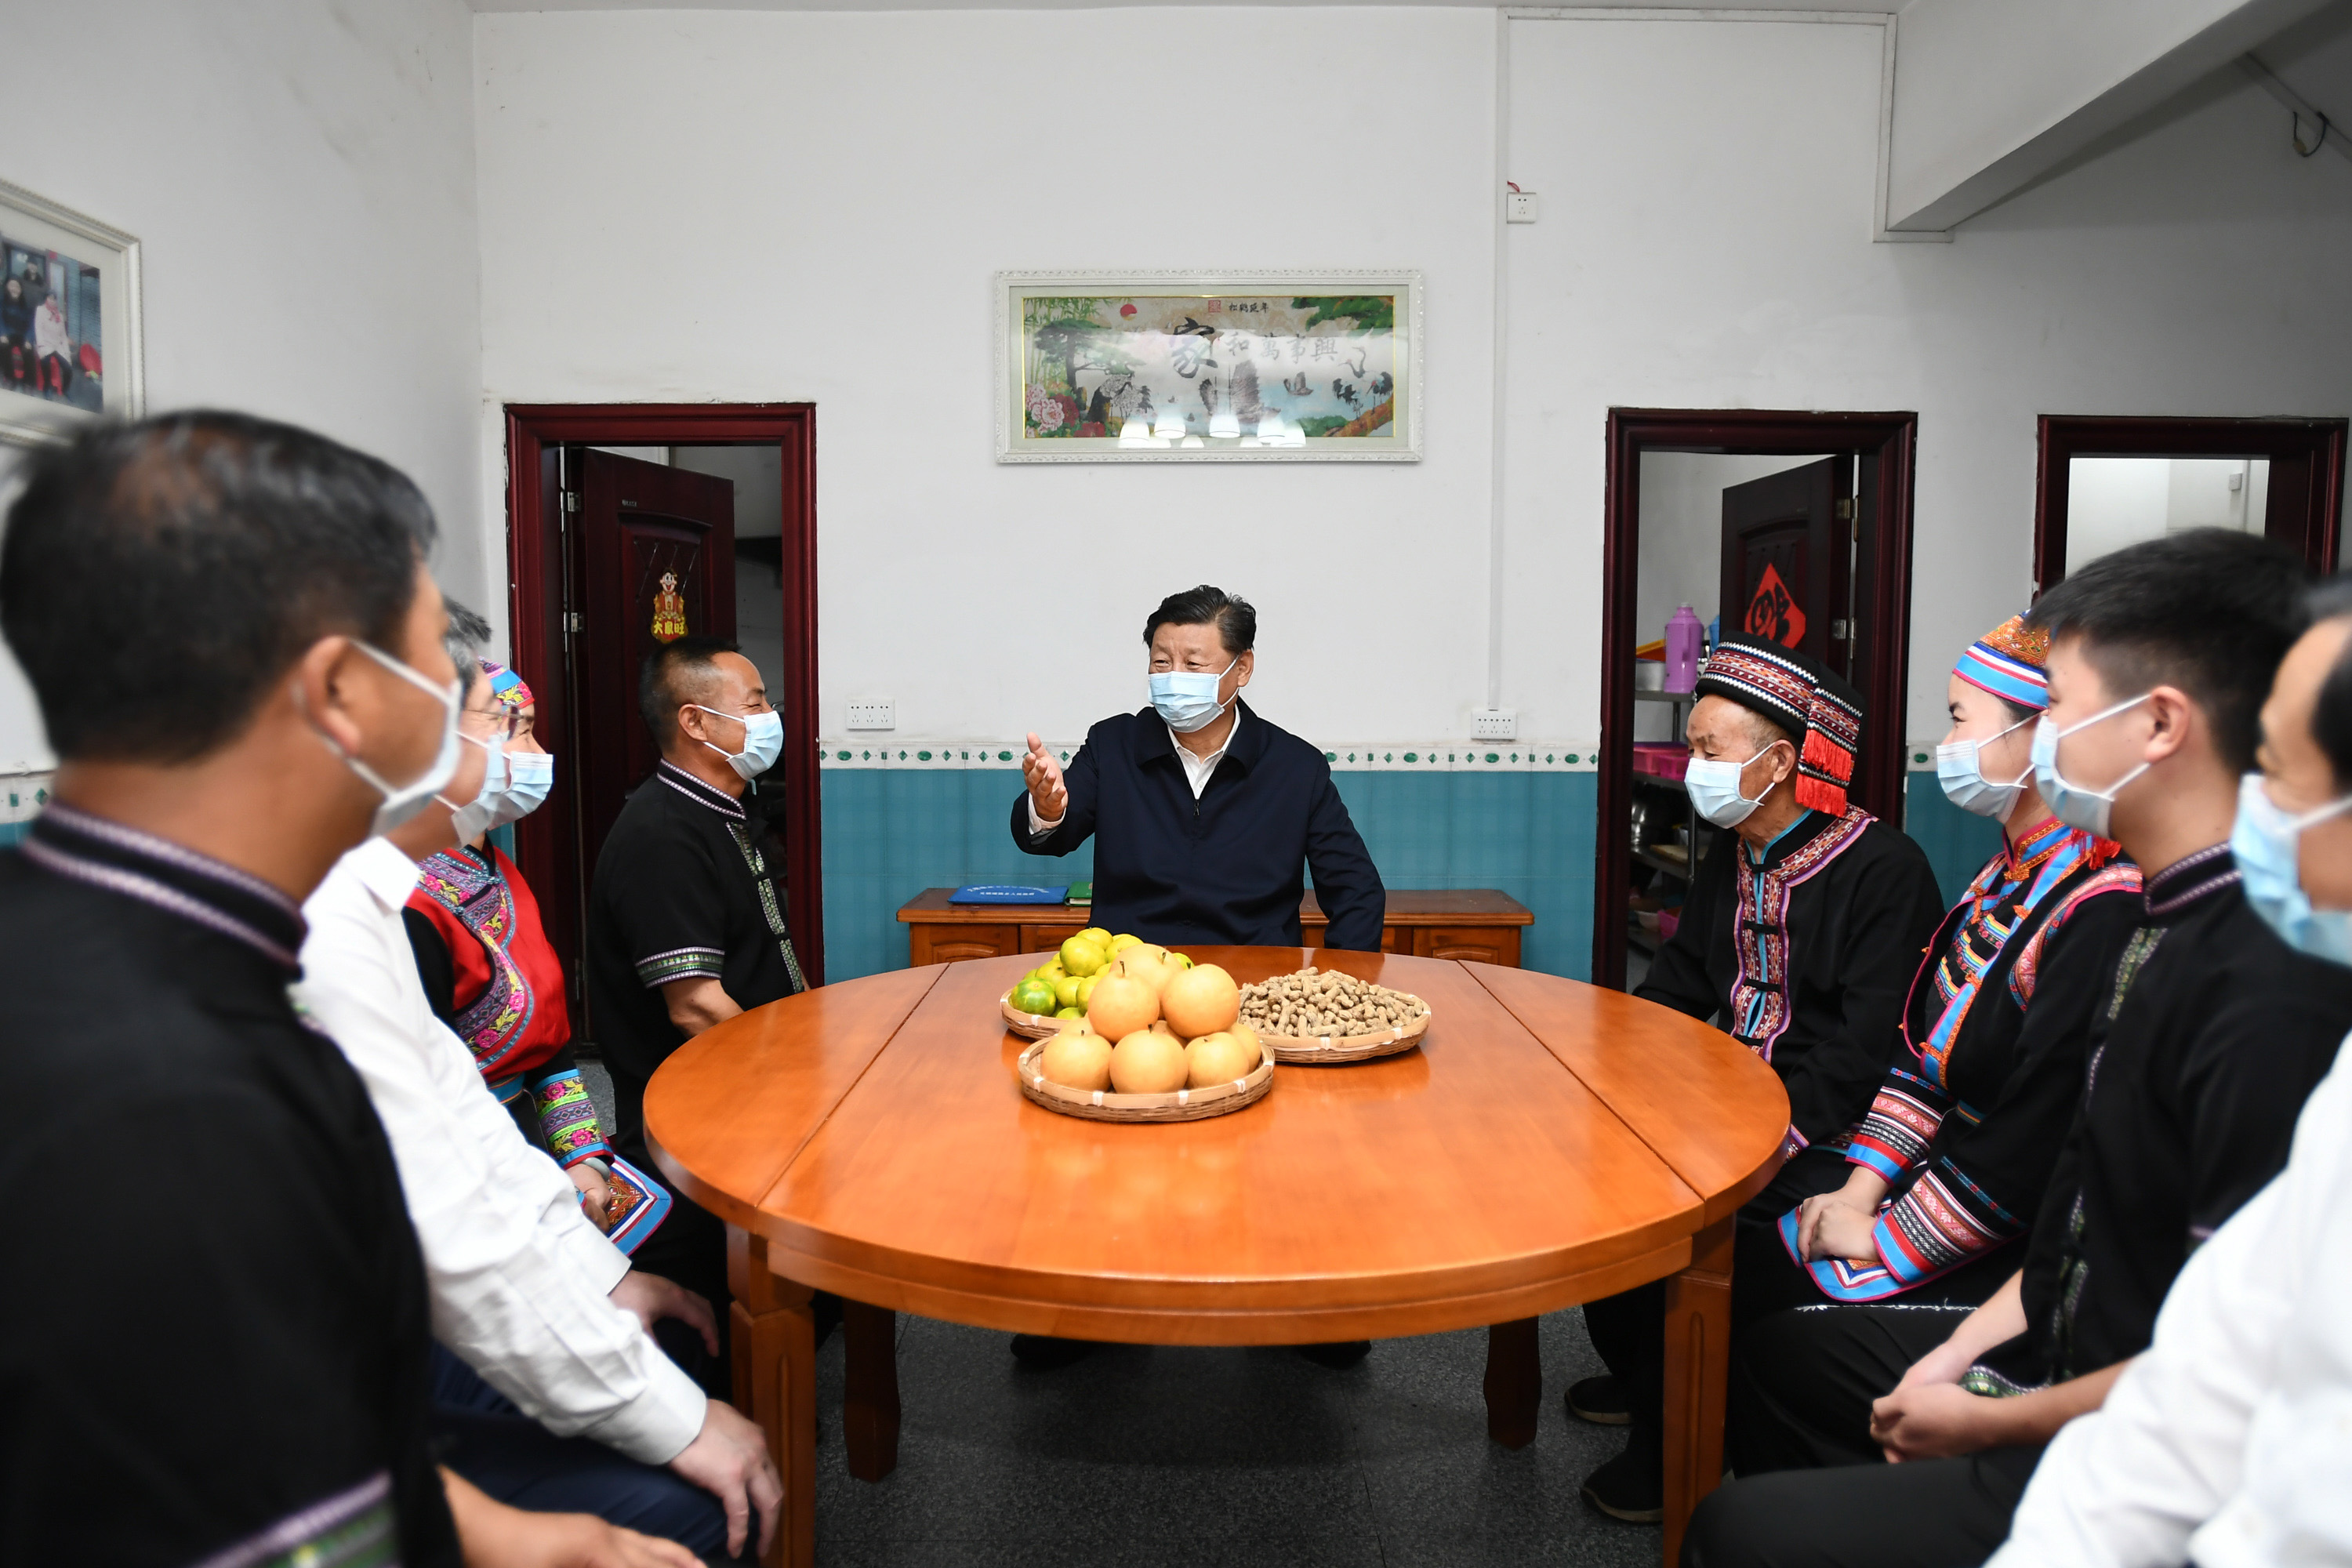 Xi Jinping learns about progress in consolidating poverty eradication at a villager’s home in Hunan Province, Sept. 16.